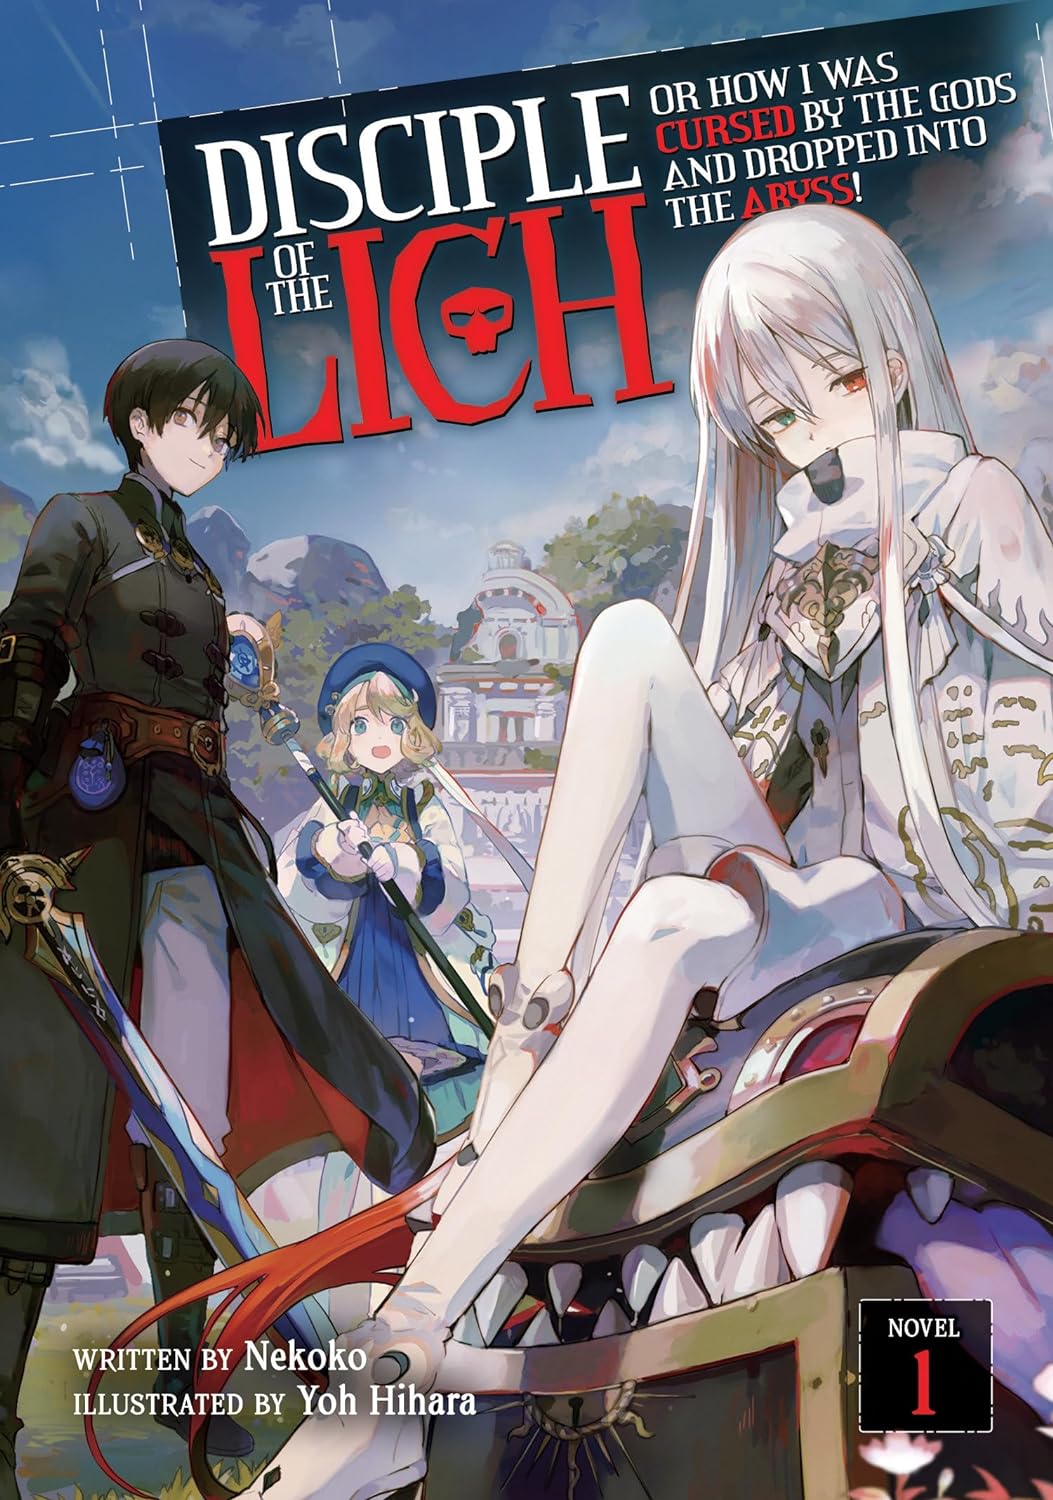 Disciple of the Lich: Or How I Was Cursed by the Gods and Dropped Into the Abyss! (Light Novel)